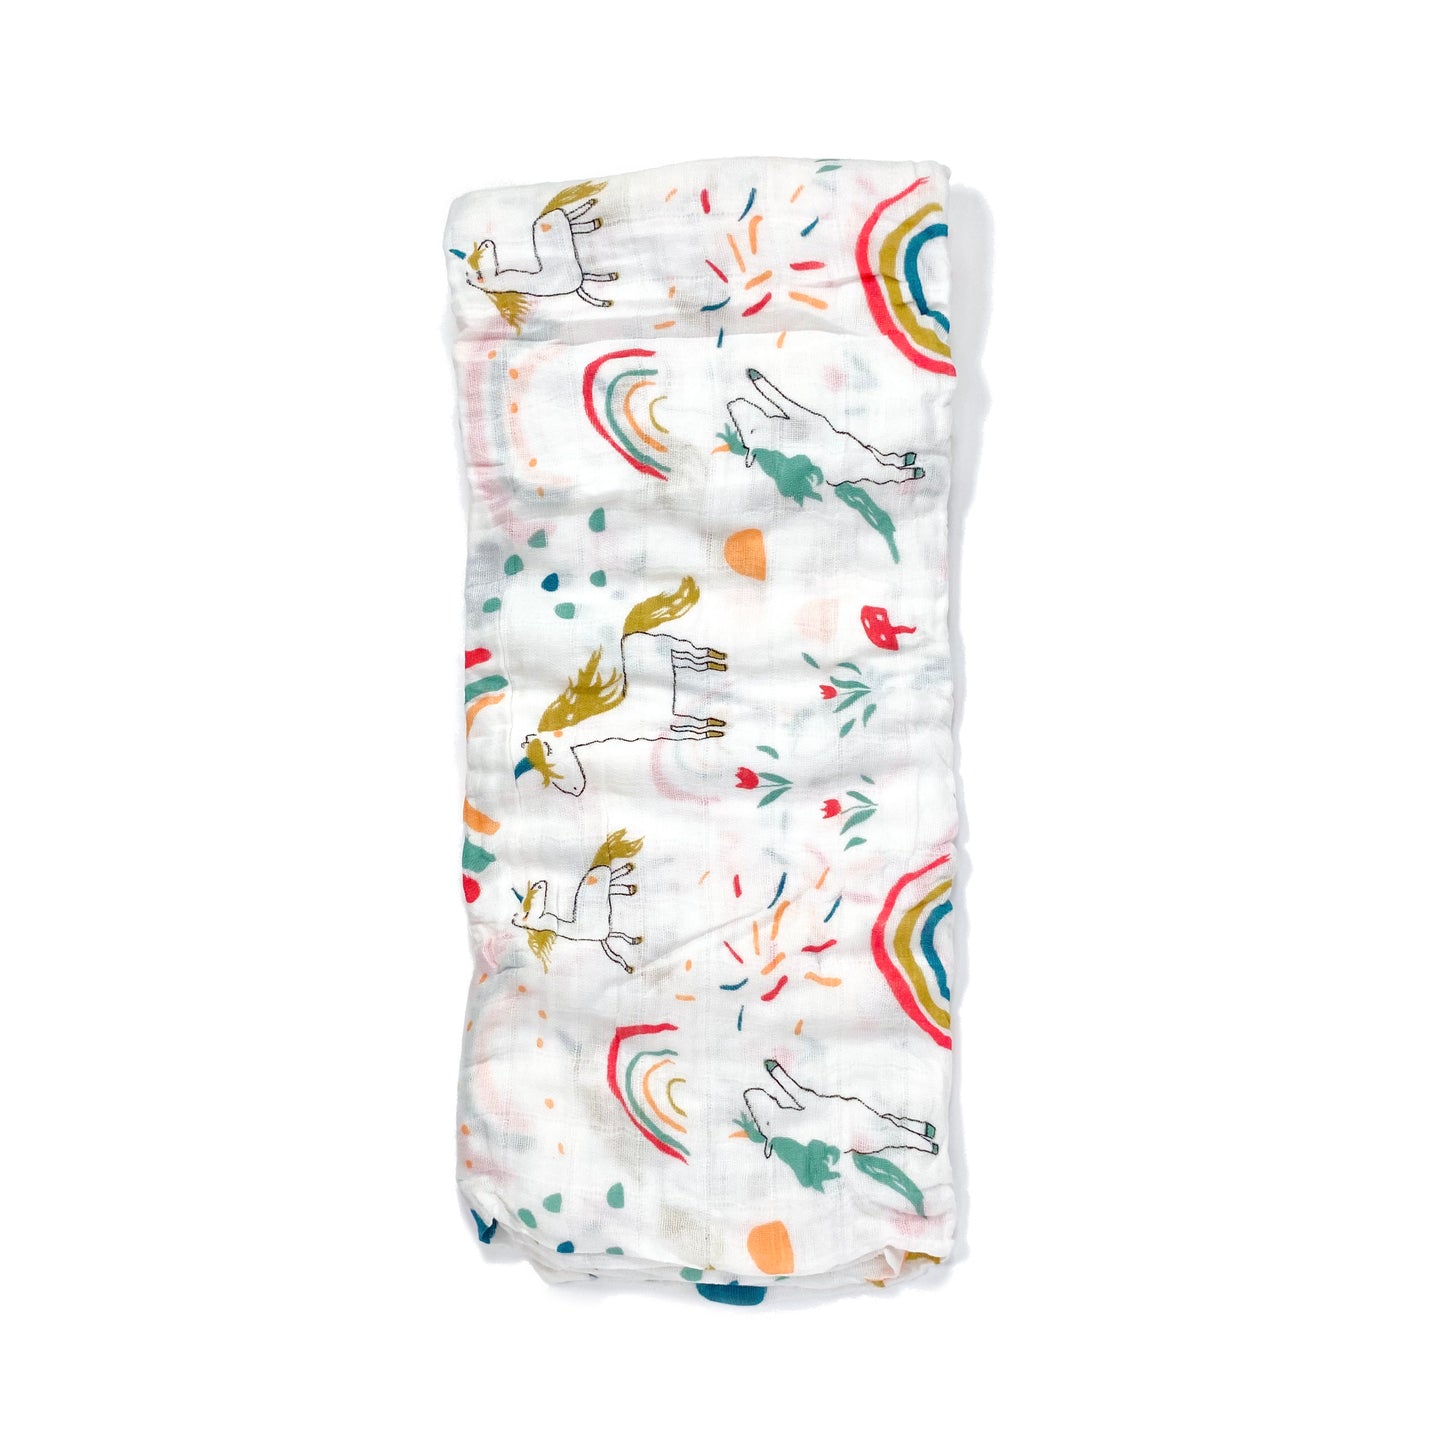 A folded muslin swaddle blanket with a unicorn design.